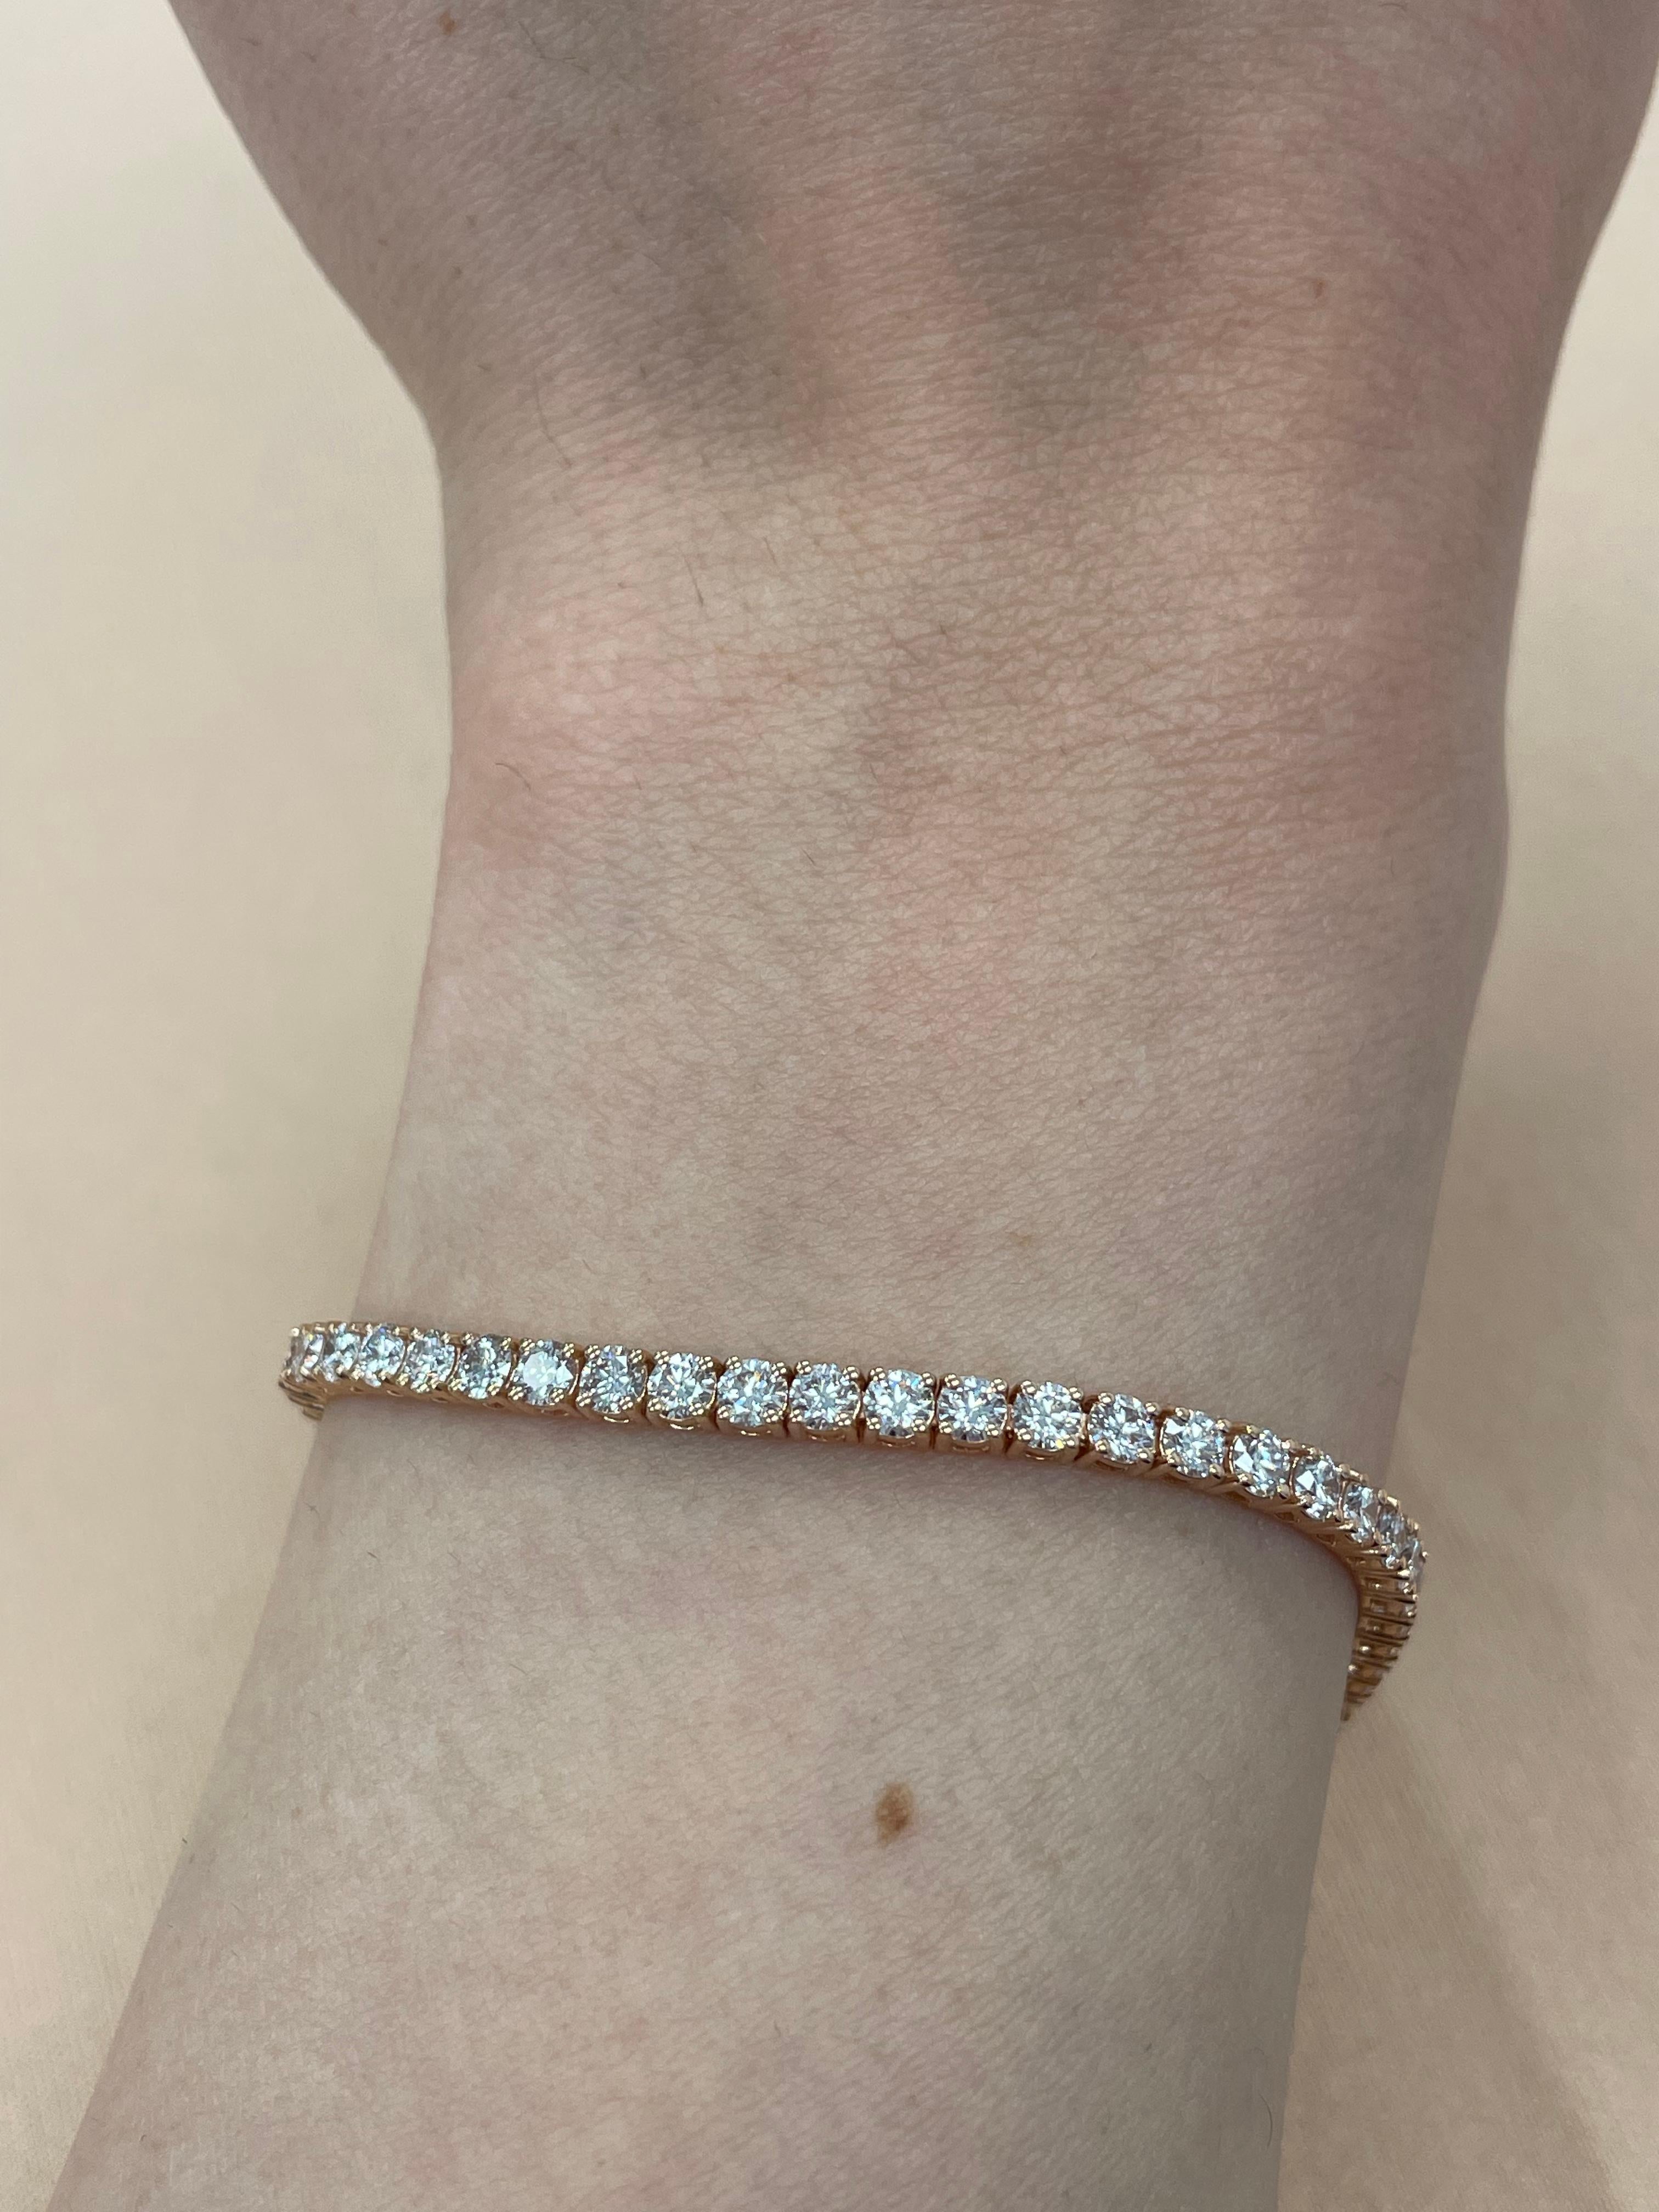 Exquisite and timeless diamonds tennis bracelet, by Alexander Beverly Hills.
59 round brilliant diamonds, 4.98 carats total. Approximately Very Light Pink color (looks like regular white diamonds in mounting) and VS2/SI1 clarity. Four prong set in